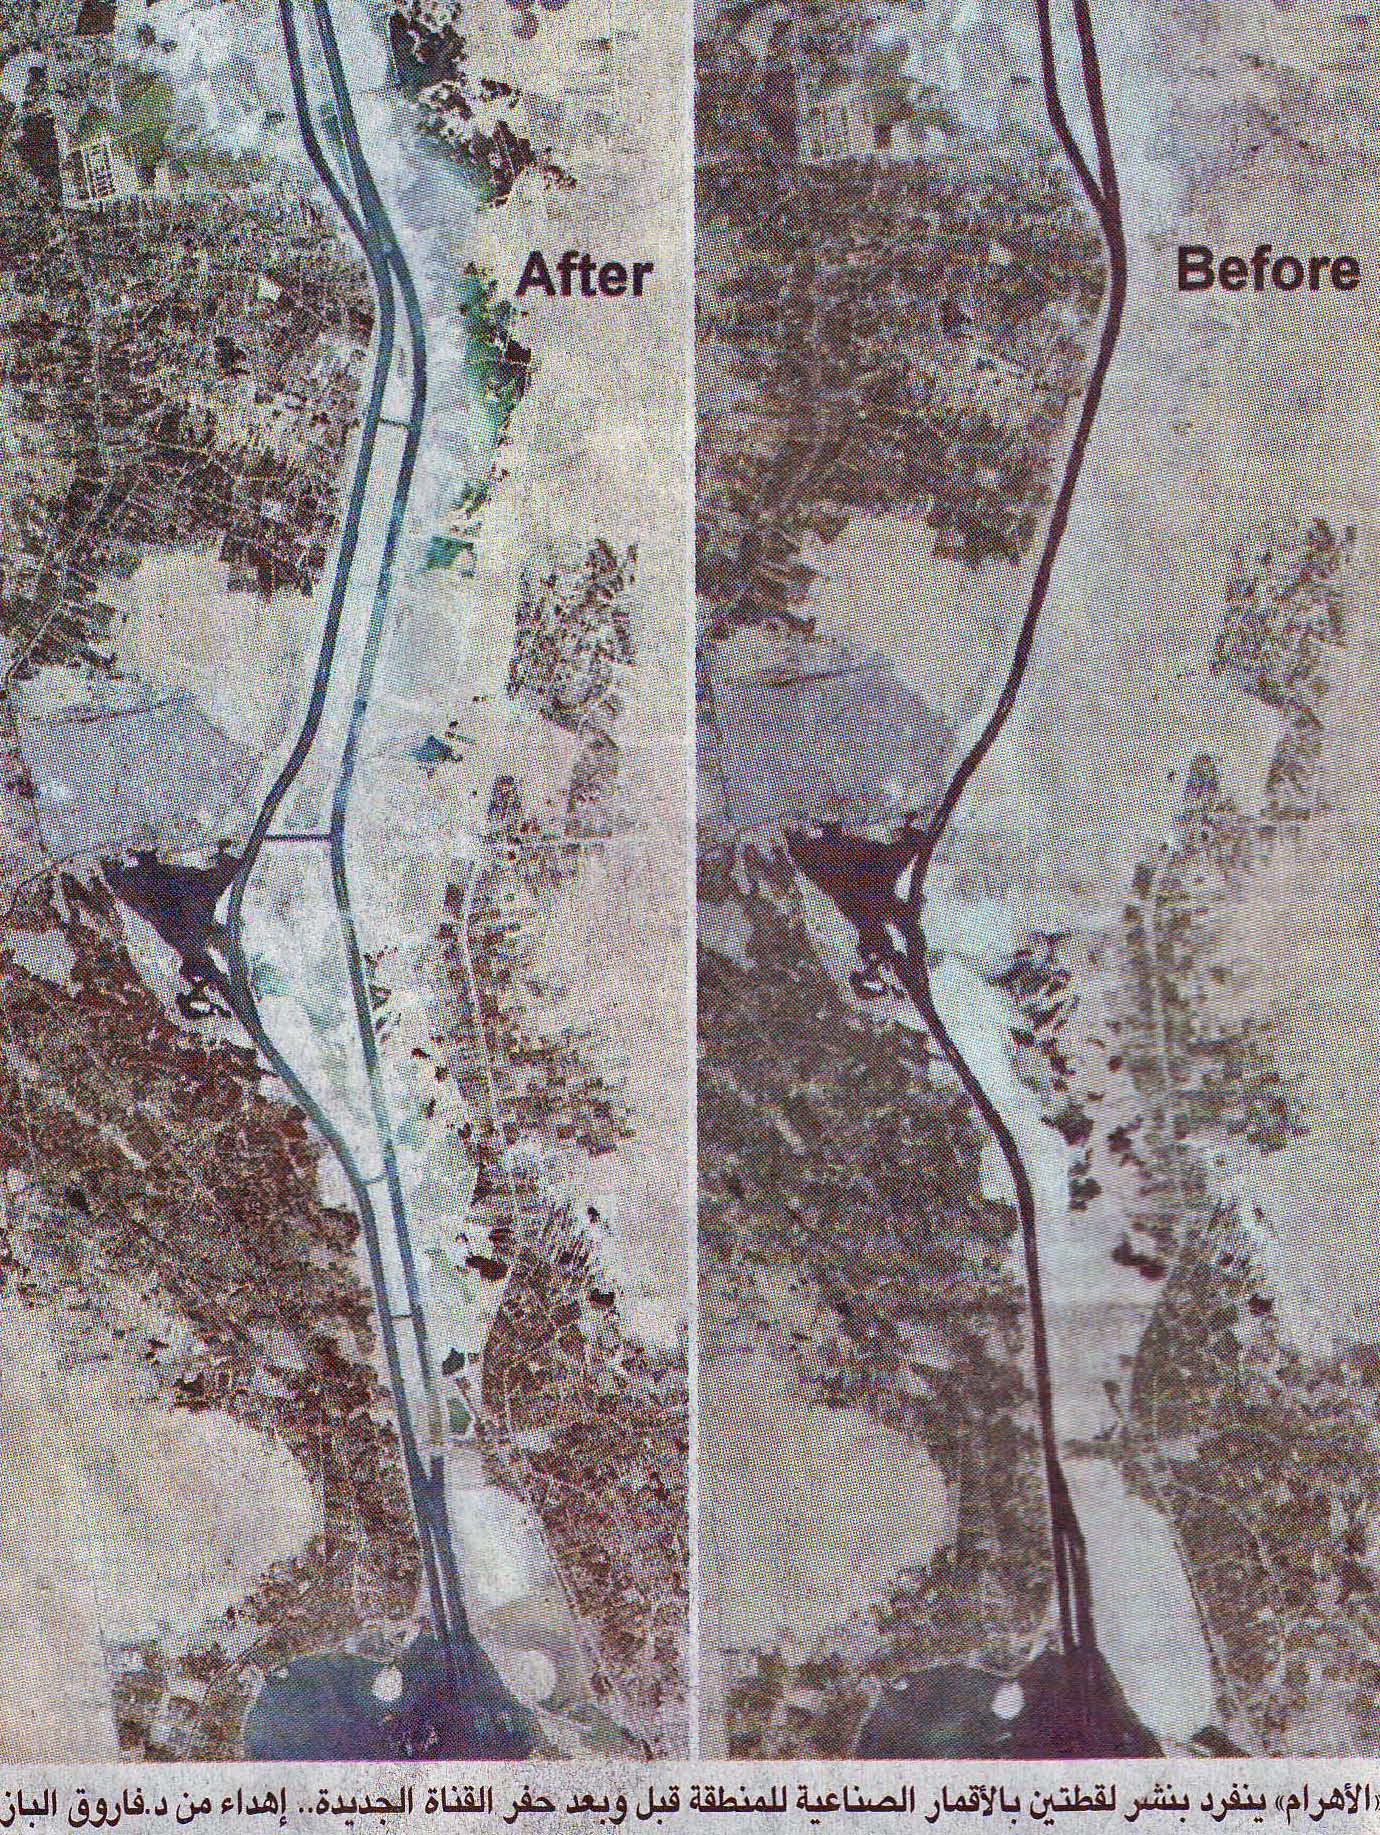 Suez Canal, before and after widening